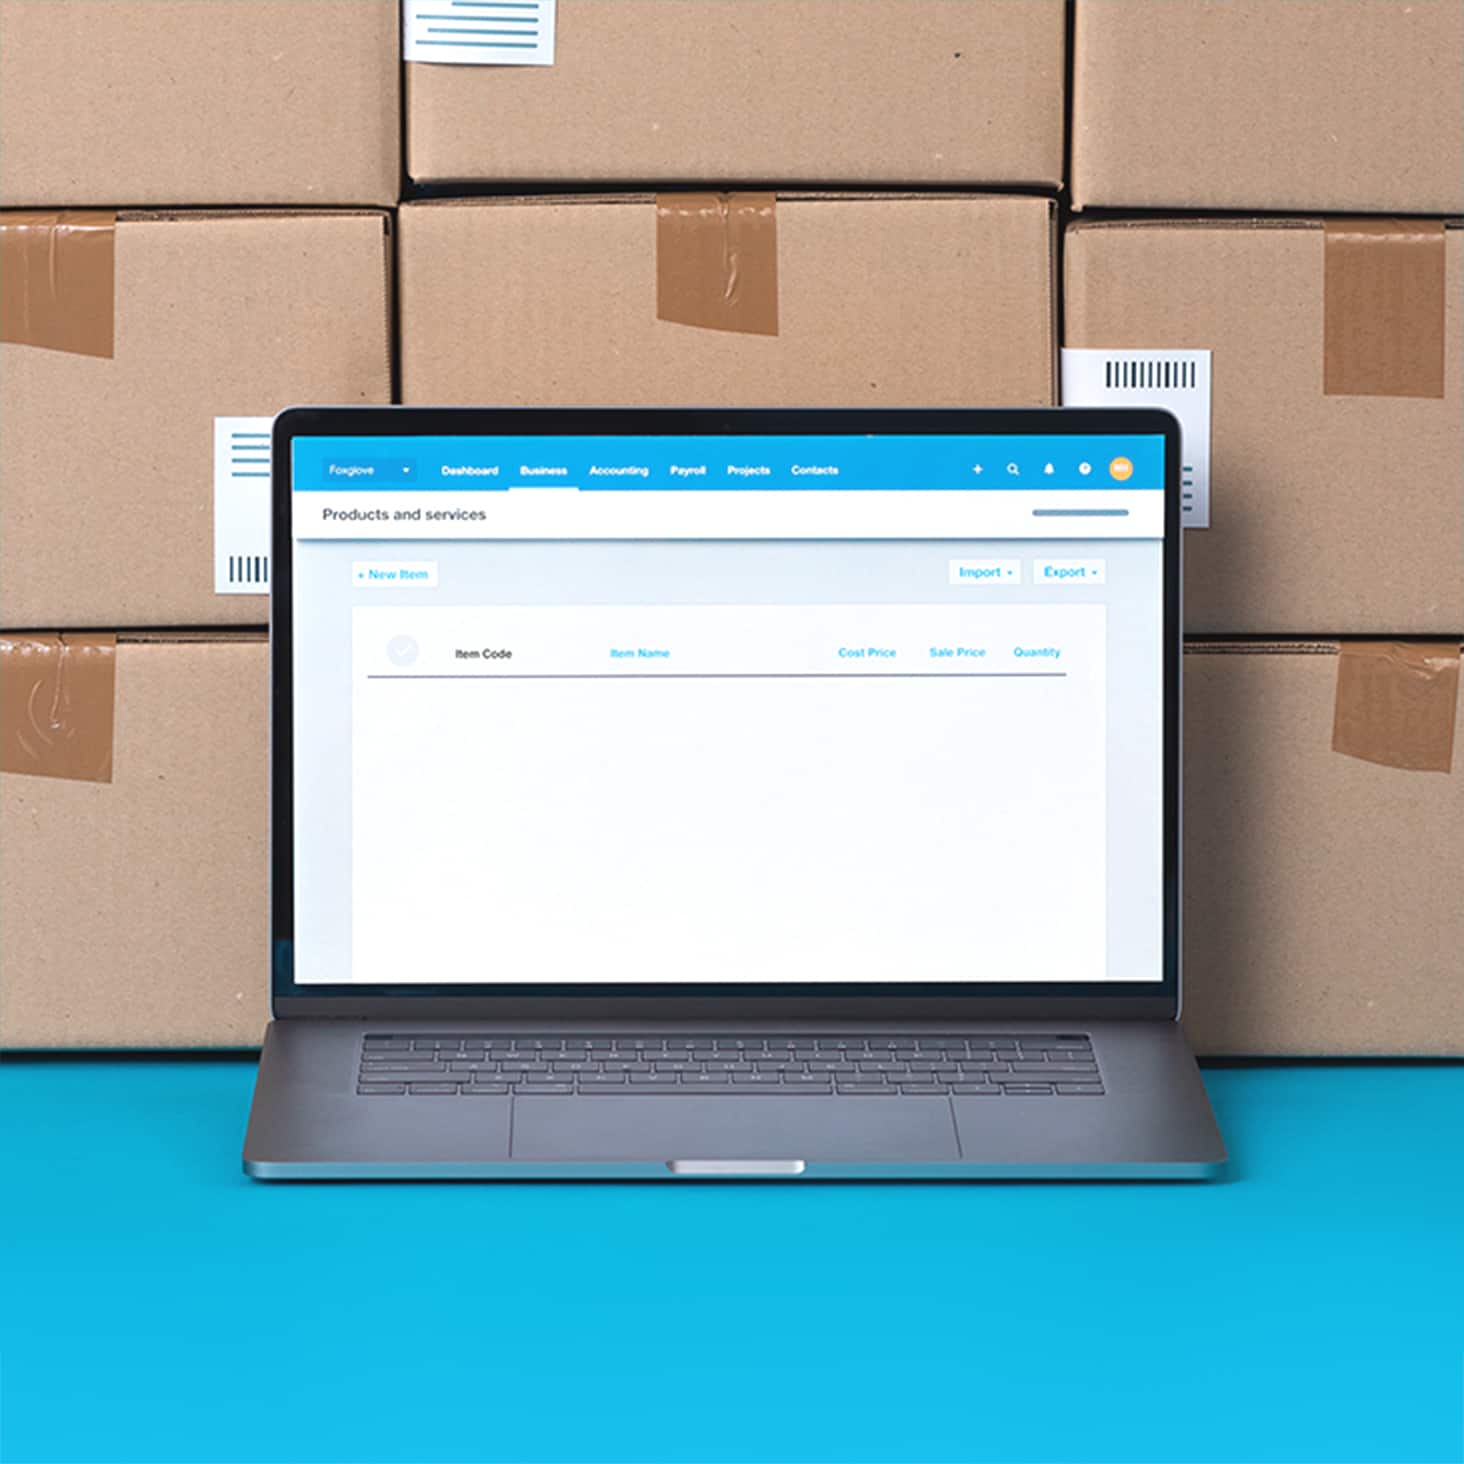 Unopened boxes are stacked near a laptop that displays items in Xero’s stock control system.